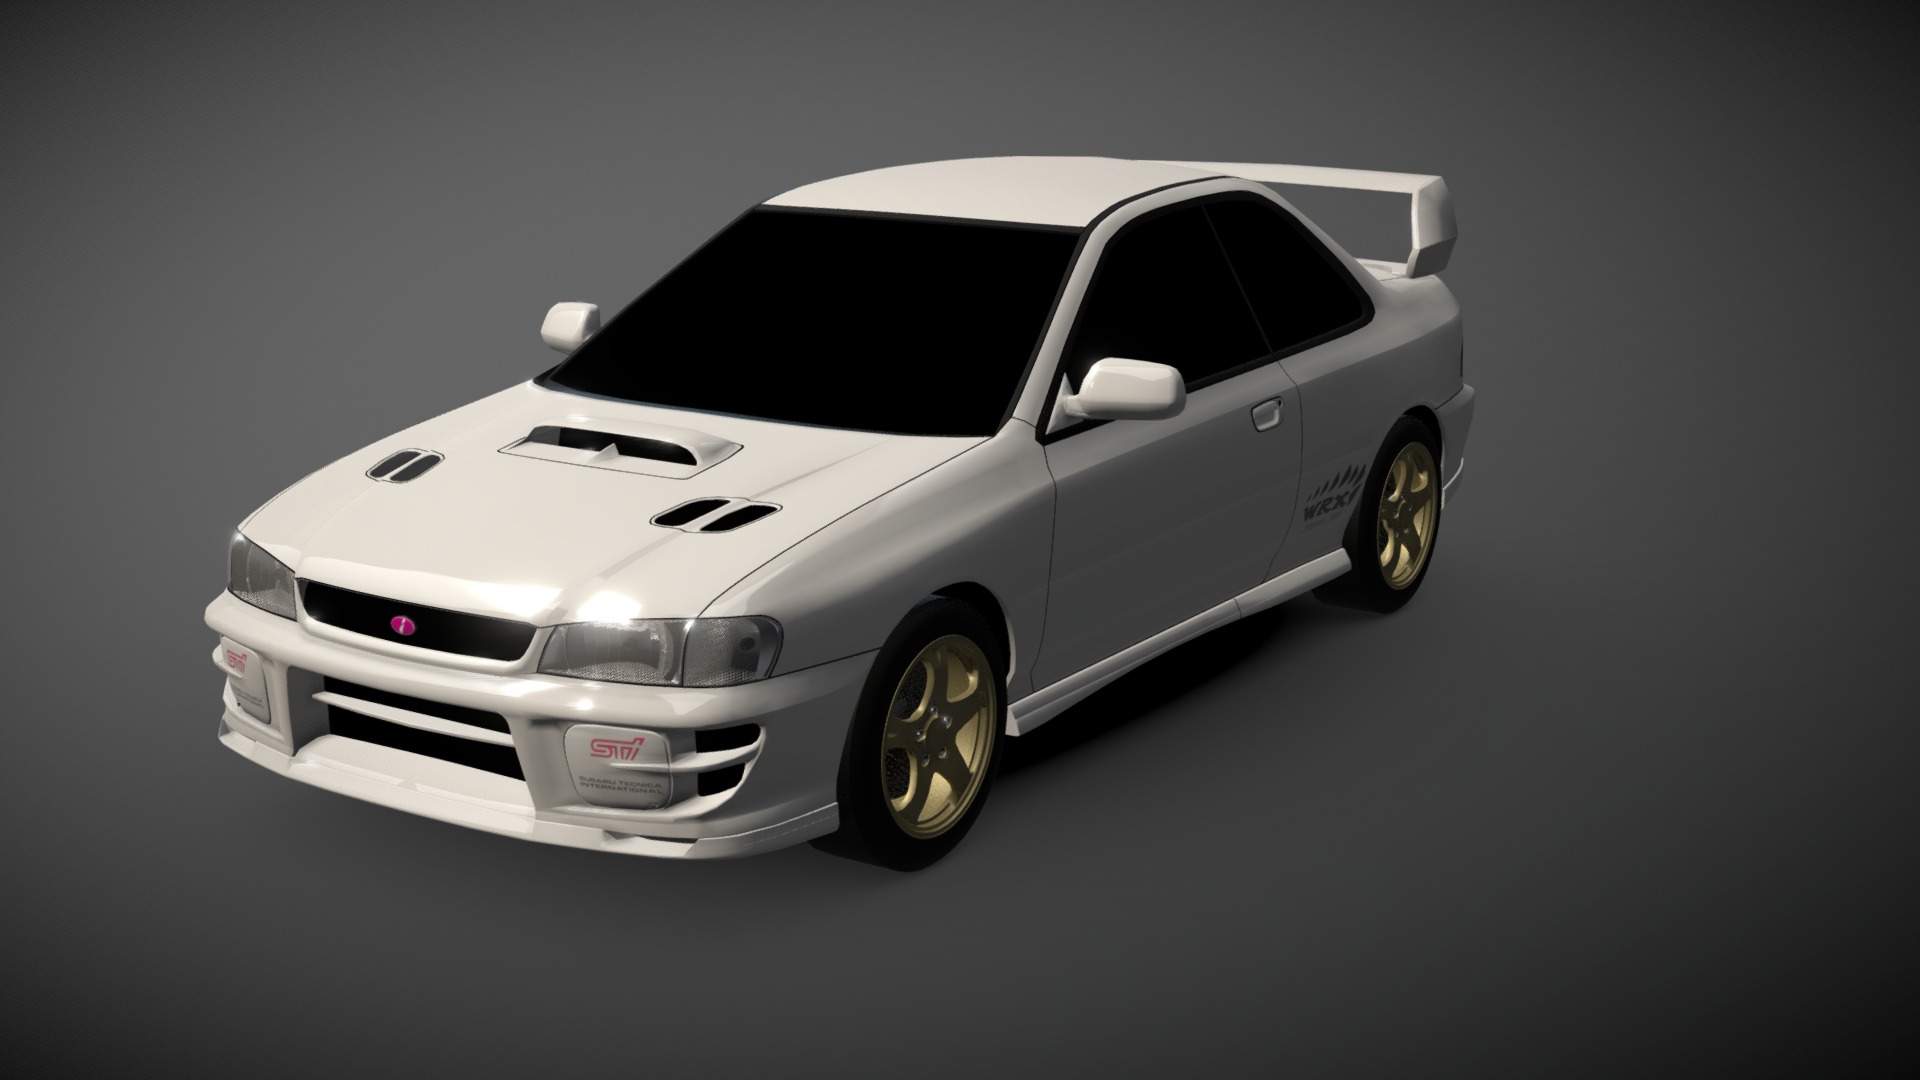 An unfinished Subaru Impreza model I made back in 09-2015. 
My third ever model.
46 338 triangles total.
About 100 hours put into it.

Made in 2015 3d model